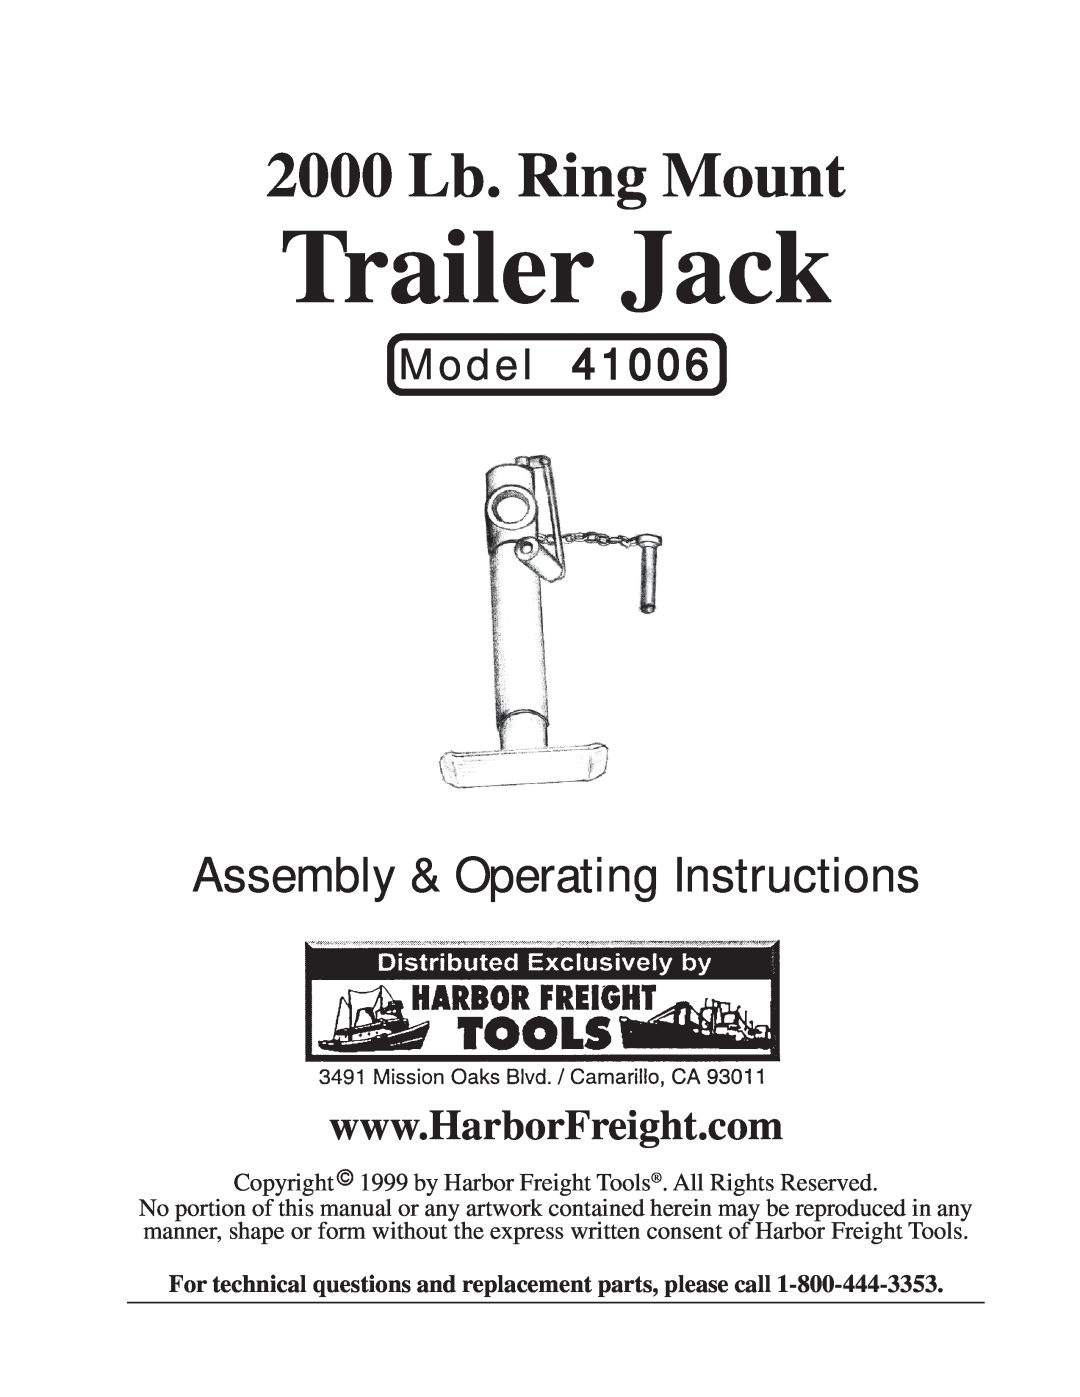 Harbor Freight Tools 41006 manual Trailer Jack, 2000 Lb. Ring Mount, Assembly & Operating Instructions, Model 